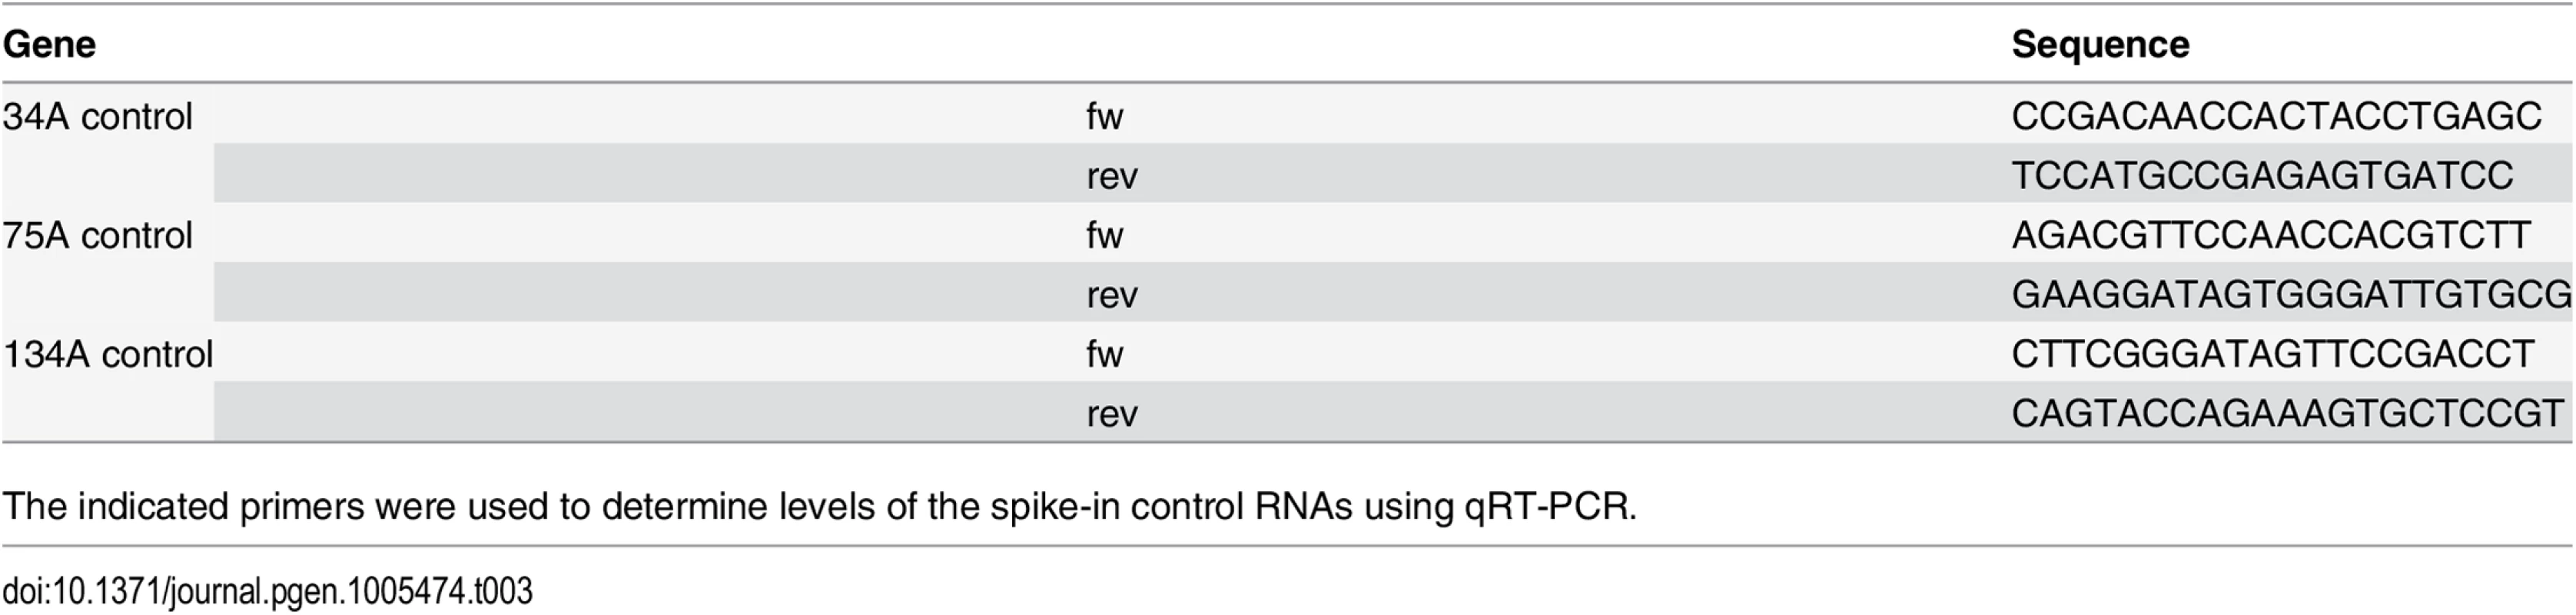 Primers used for qRT-PCR against spike-in control RNAs.